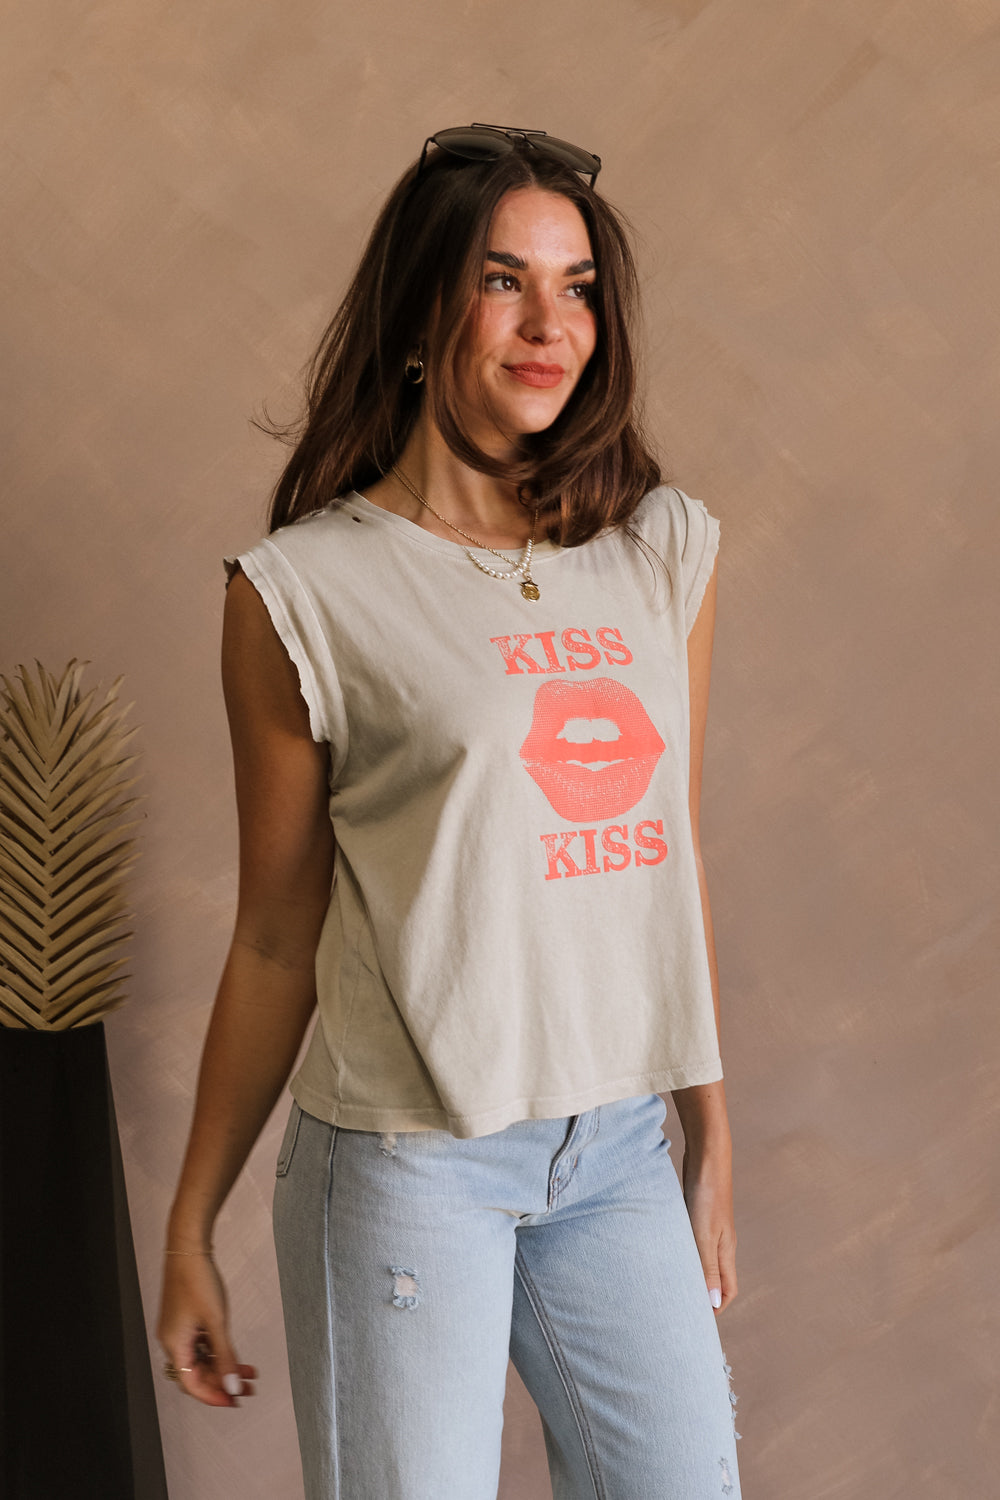 Side view of female model wearing the Kiss Stone Taupe Graphic Top which features Stone Taupe Cotton Fabric, Distressed Details, Sleeveless, Round Neckline and Kiss Graphic with Lips